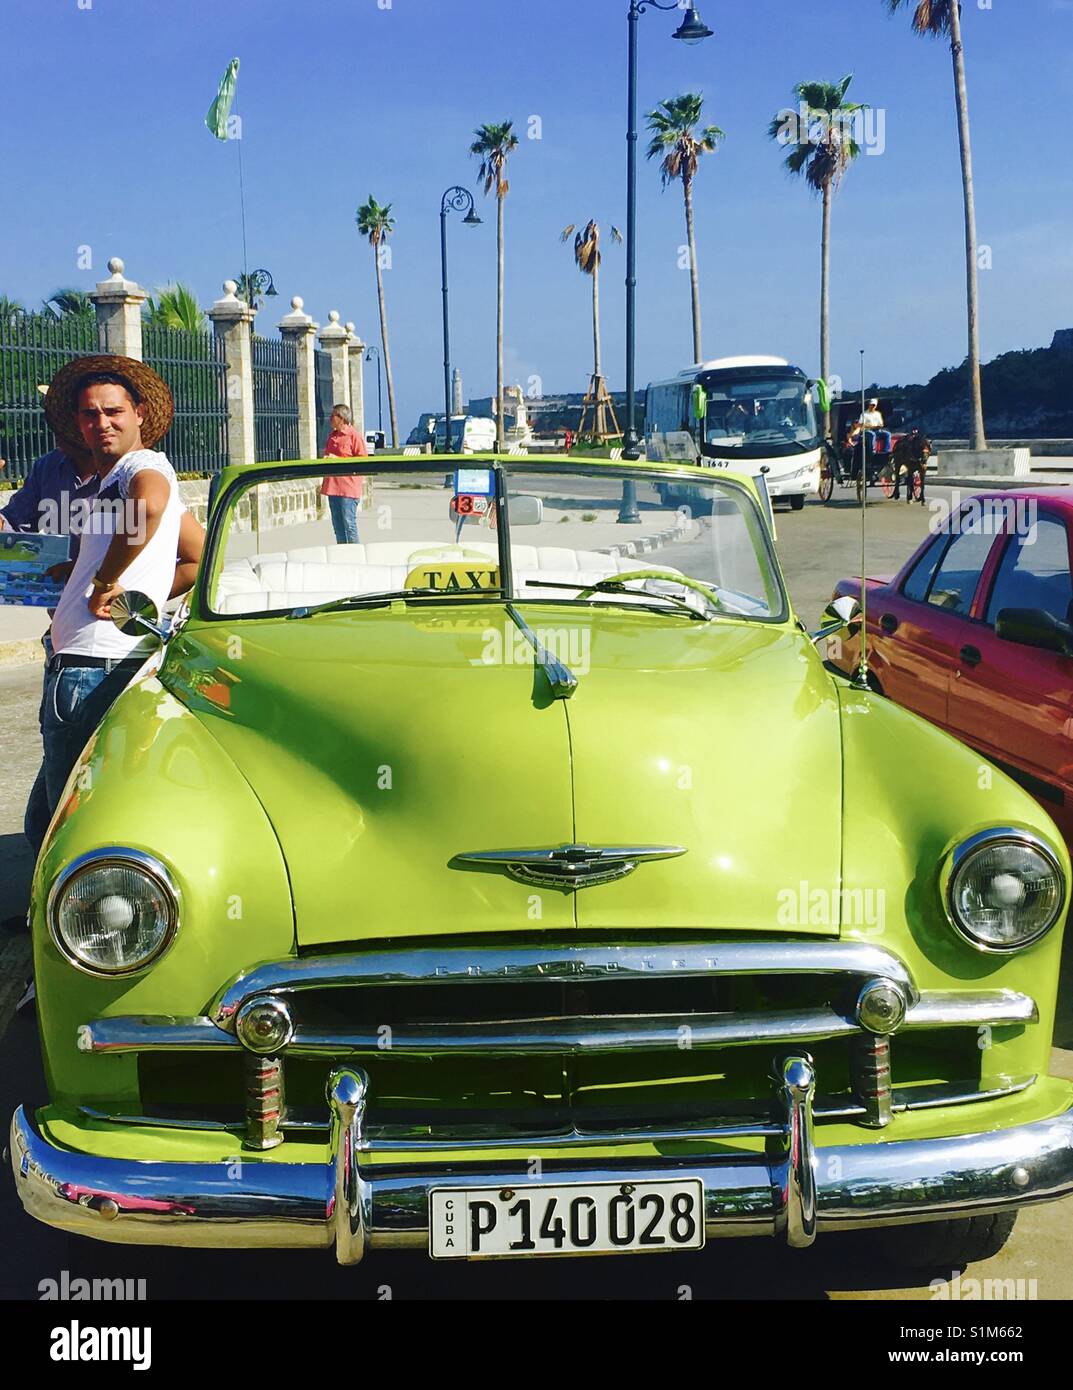 A Cuban man standing by his colorful 1950's convertible Chevrolet car in Havana, Cuba. Stock Photo